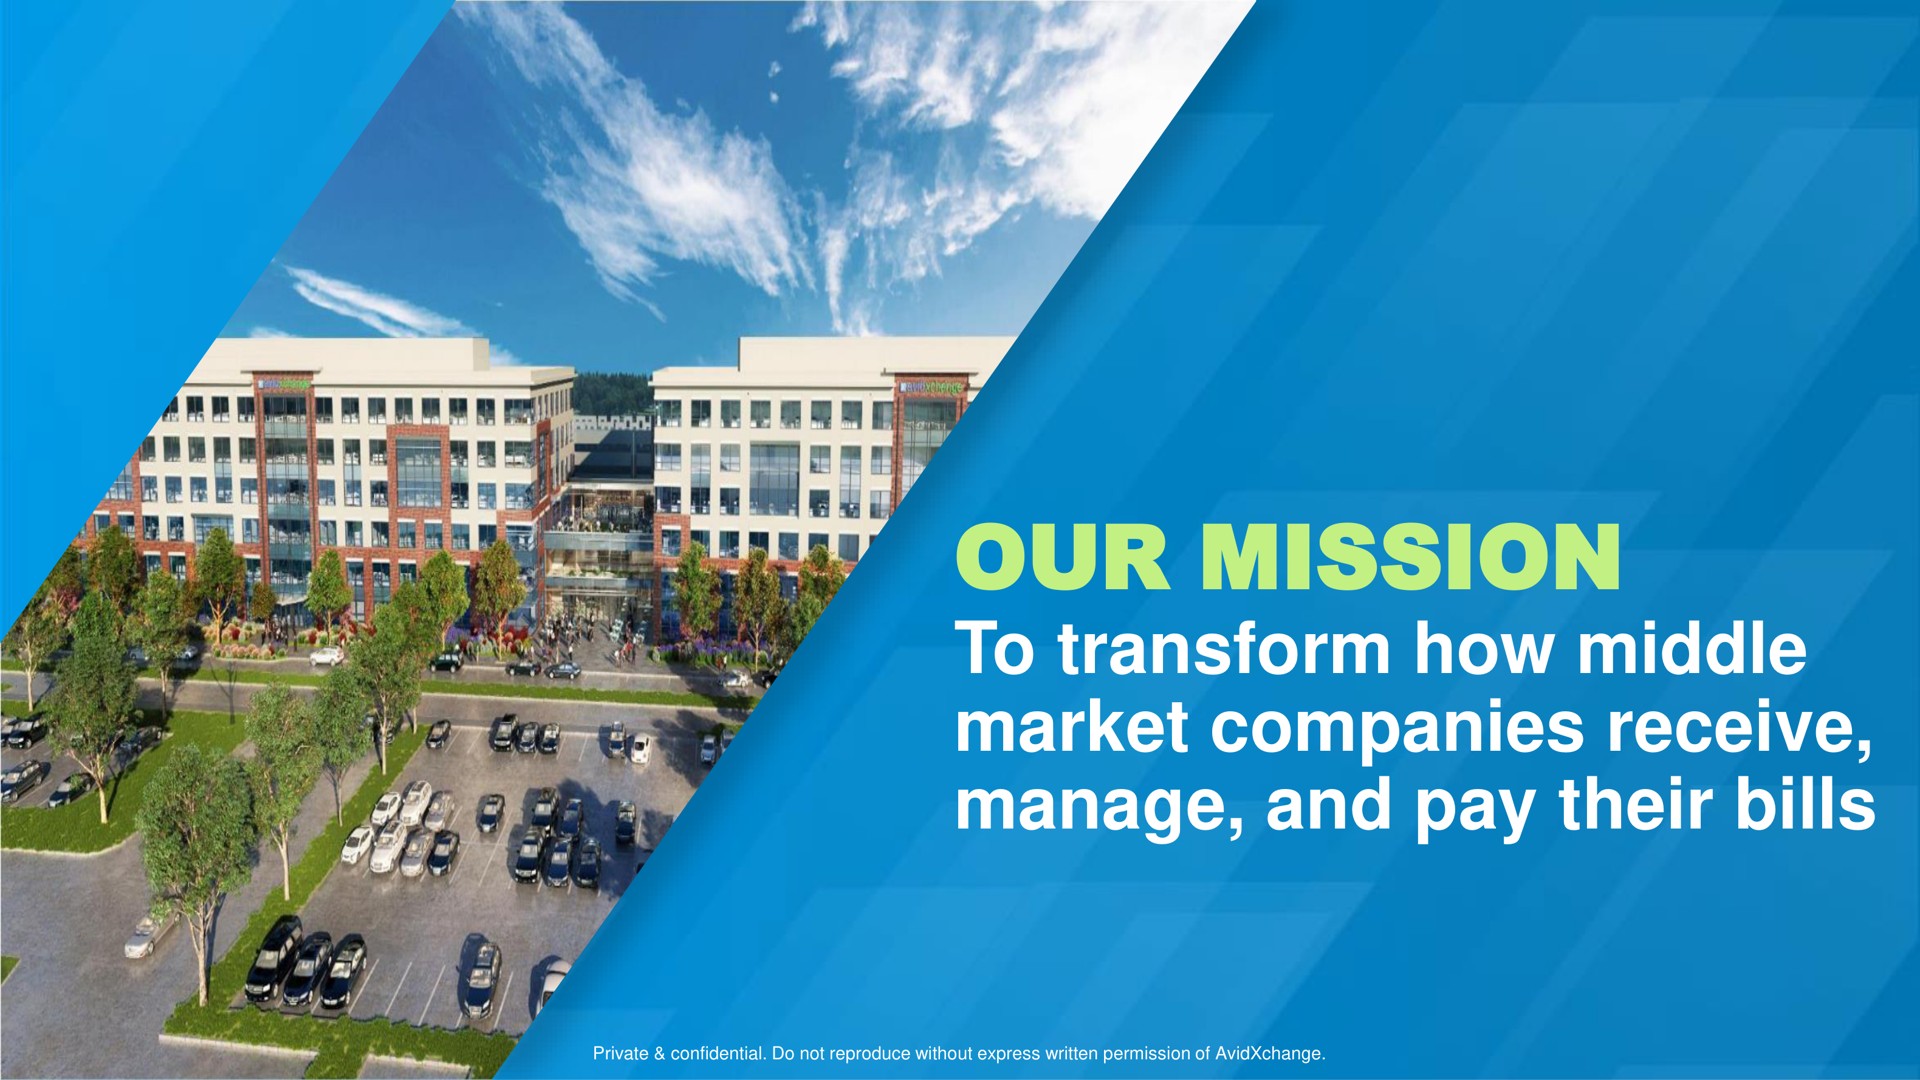 our mission to transform how middle market companies receive manage and pay their bills | AvidXchange